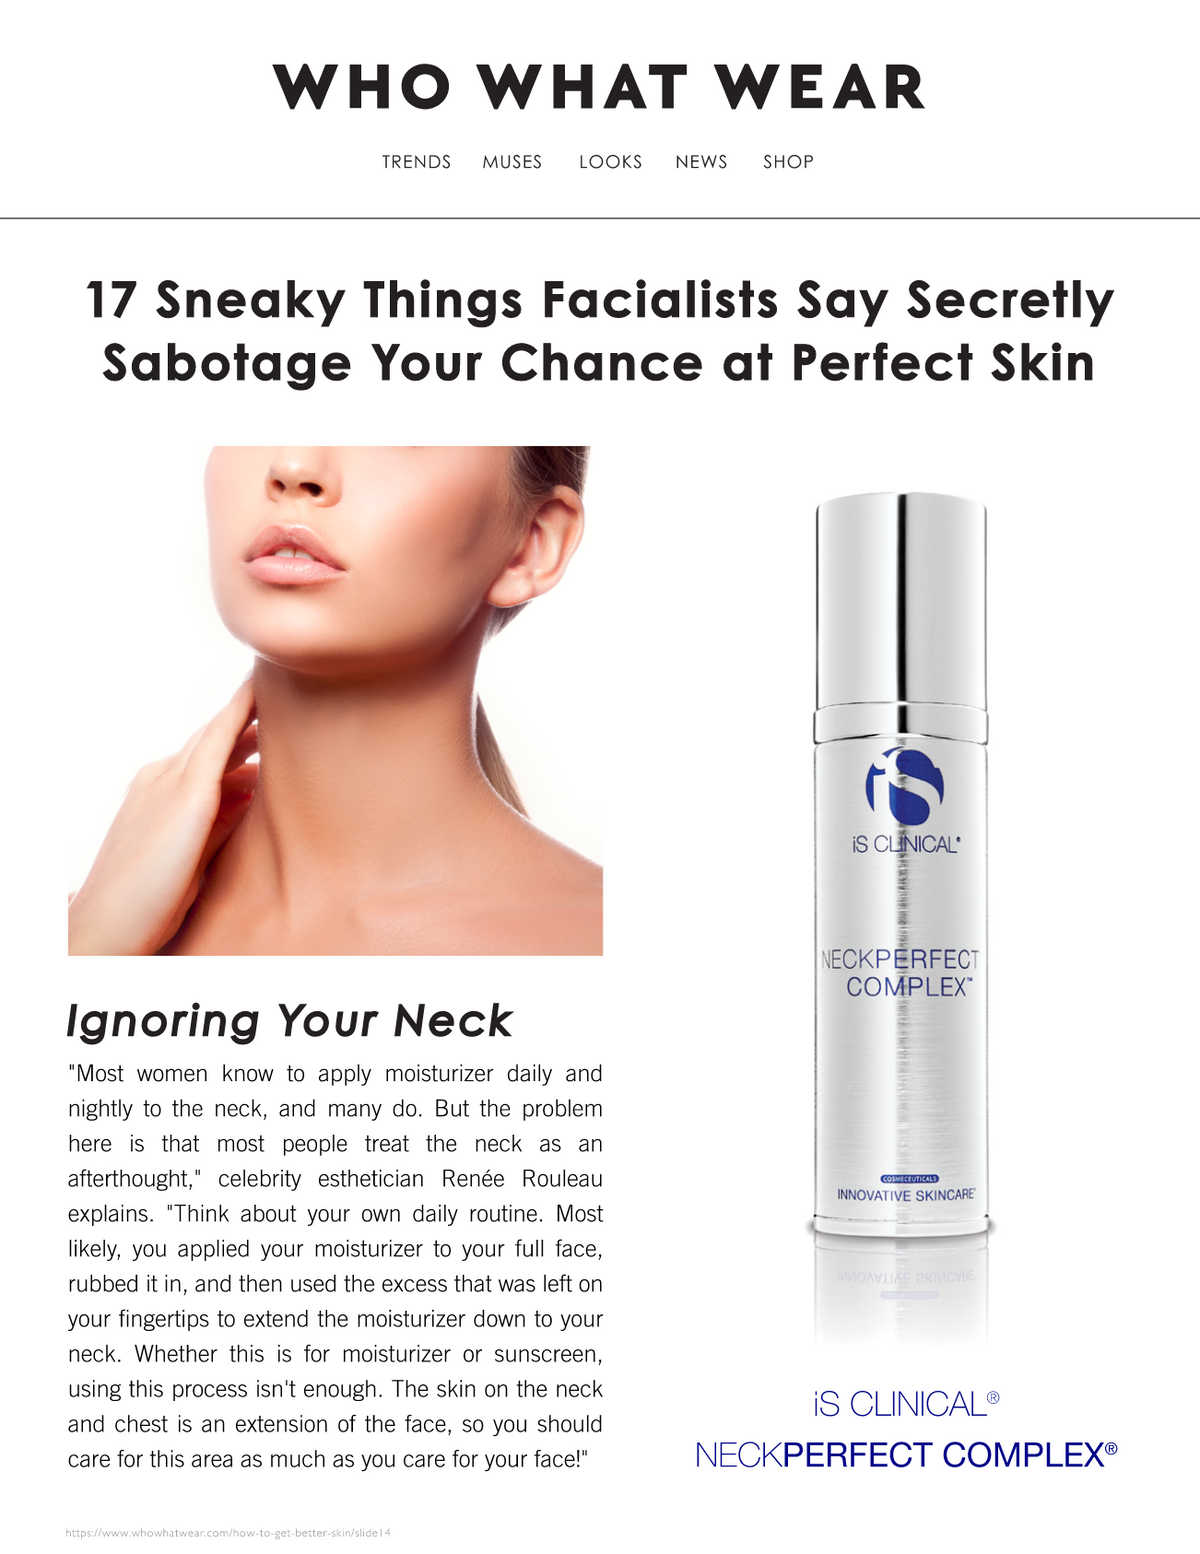 iS Clinical Neckperfect Complex Free Shipping